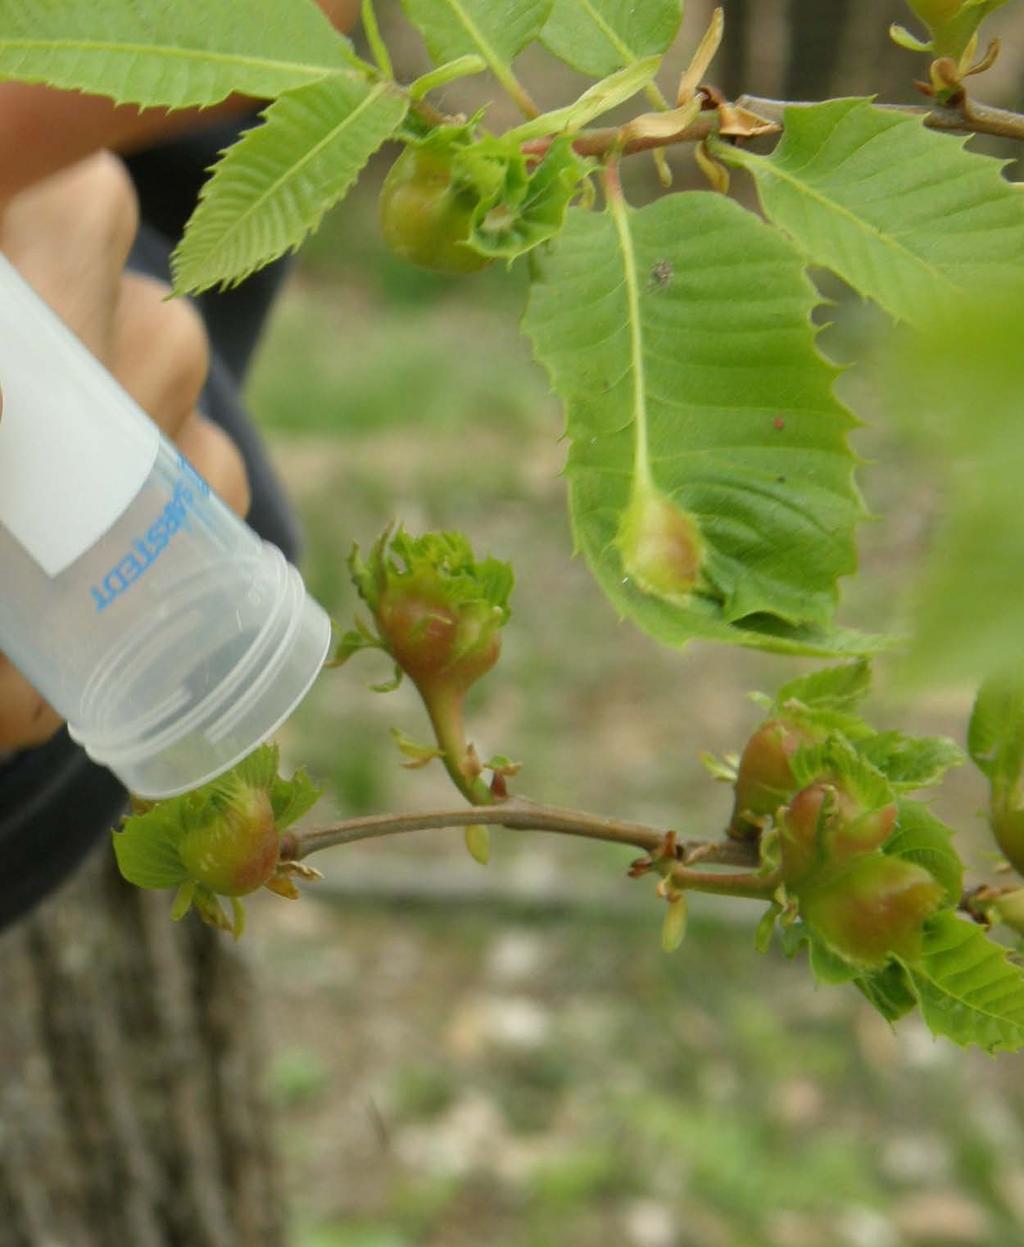 Chestnut tree gall wasp El Bierzo, Leòn 2014 Why is biological control is a better method?